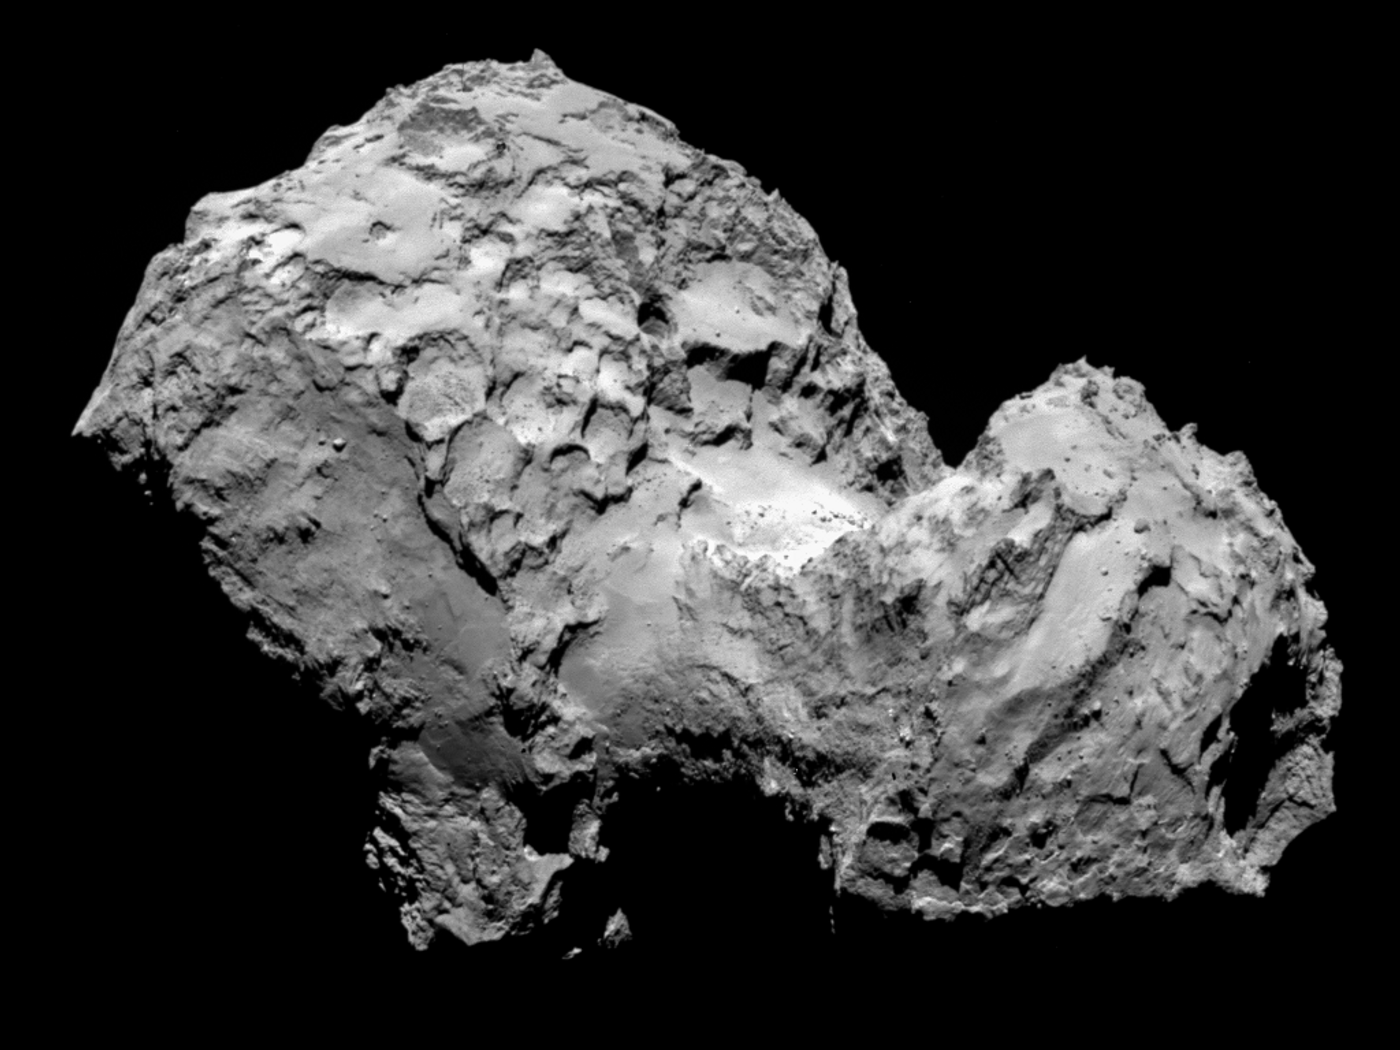 A picture of Comet 67P as taken by Rosetta.